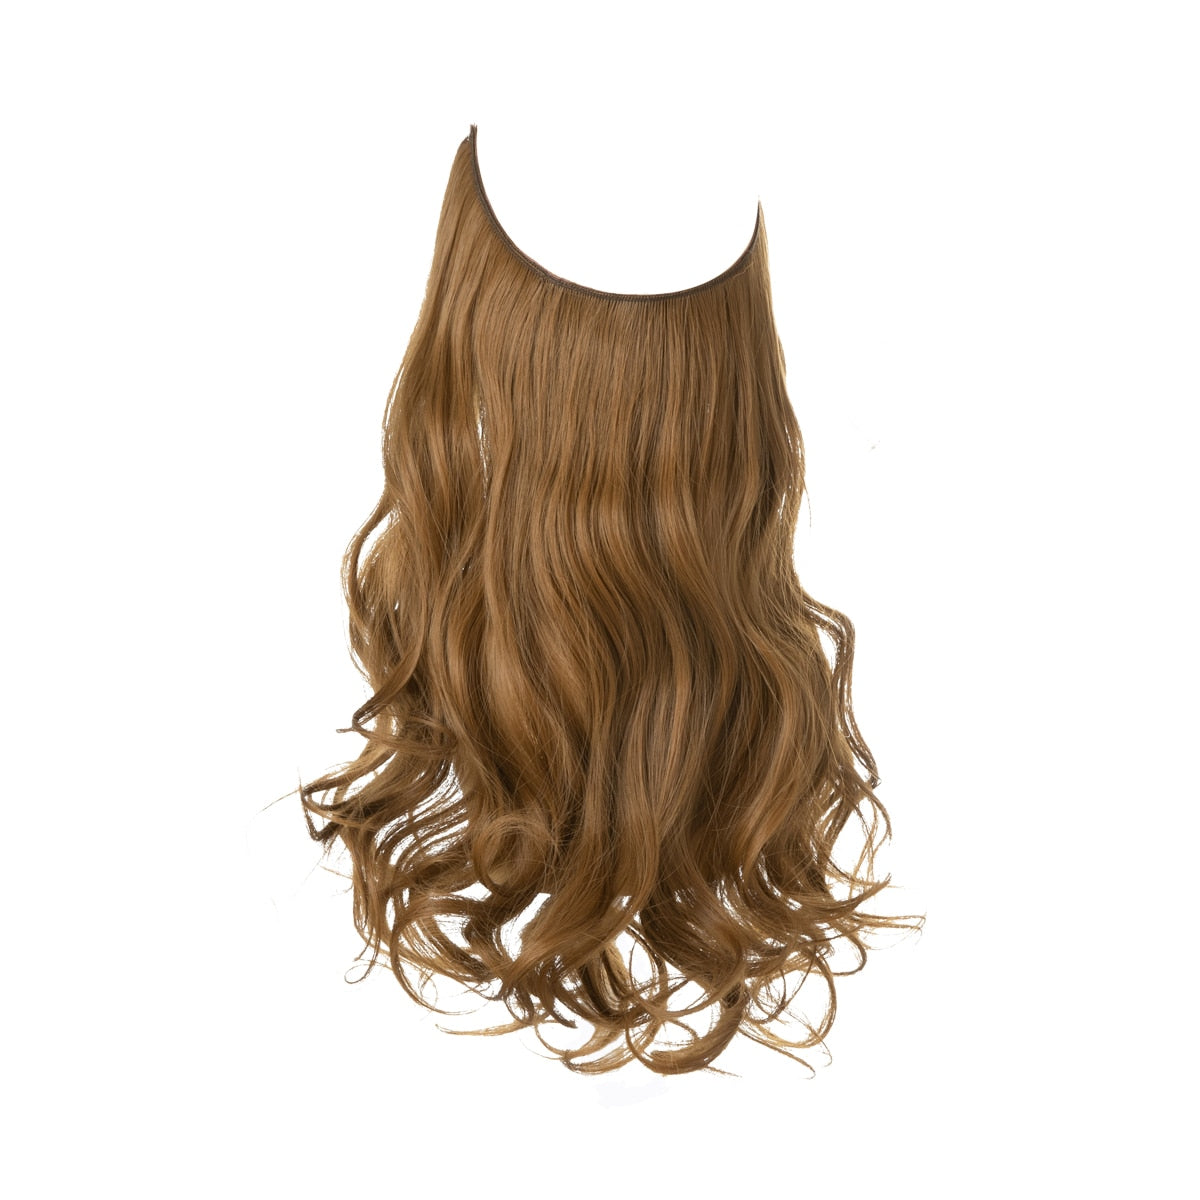 TEEK - Invisible Synth No Clip No Comb Wave Hair Extensions | Dark Varieties HAIR theteekdotcom Golden Auburn 14inches 